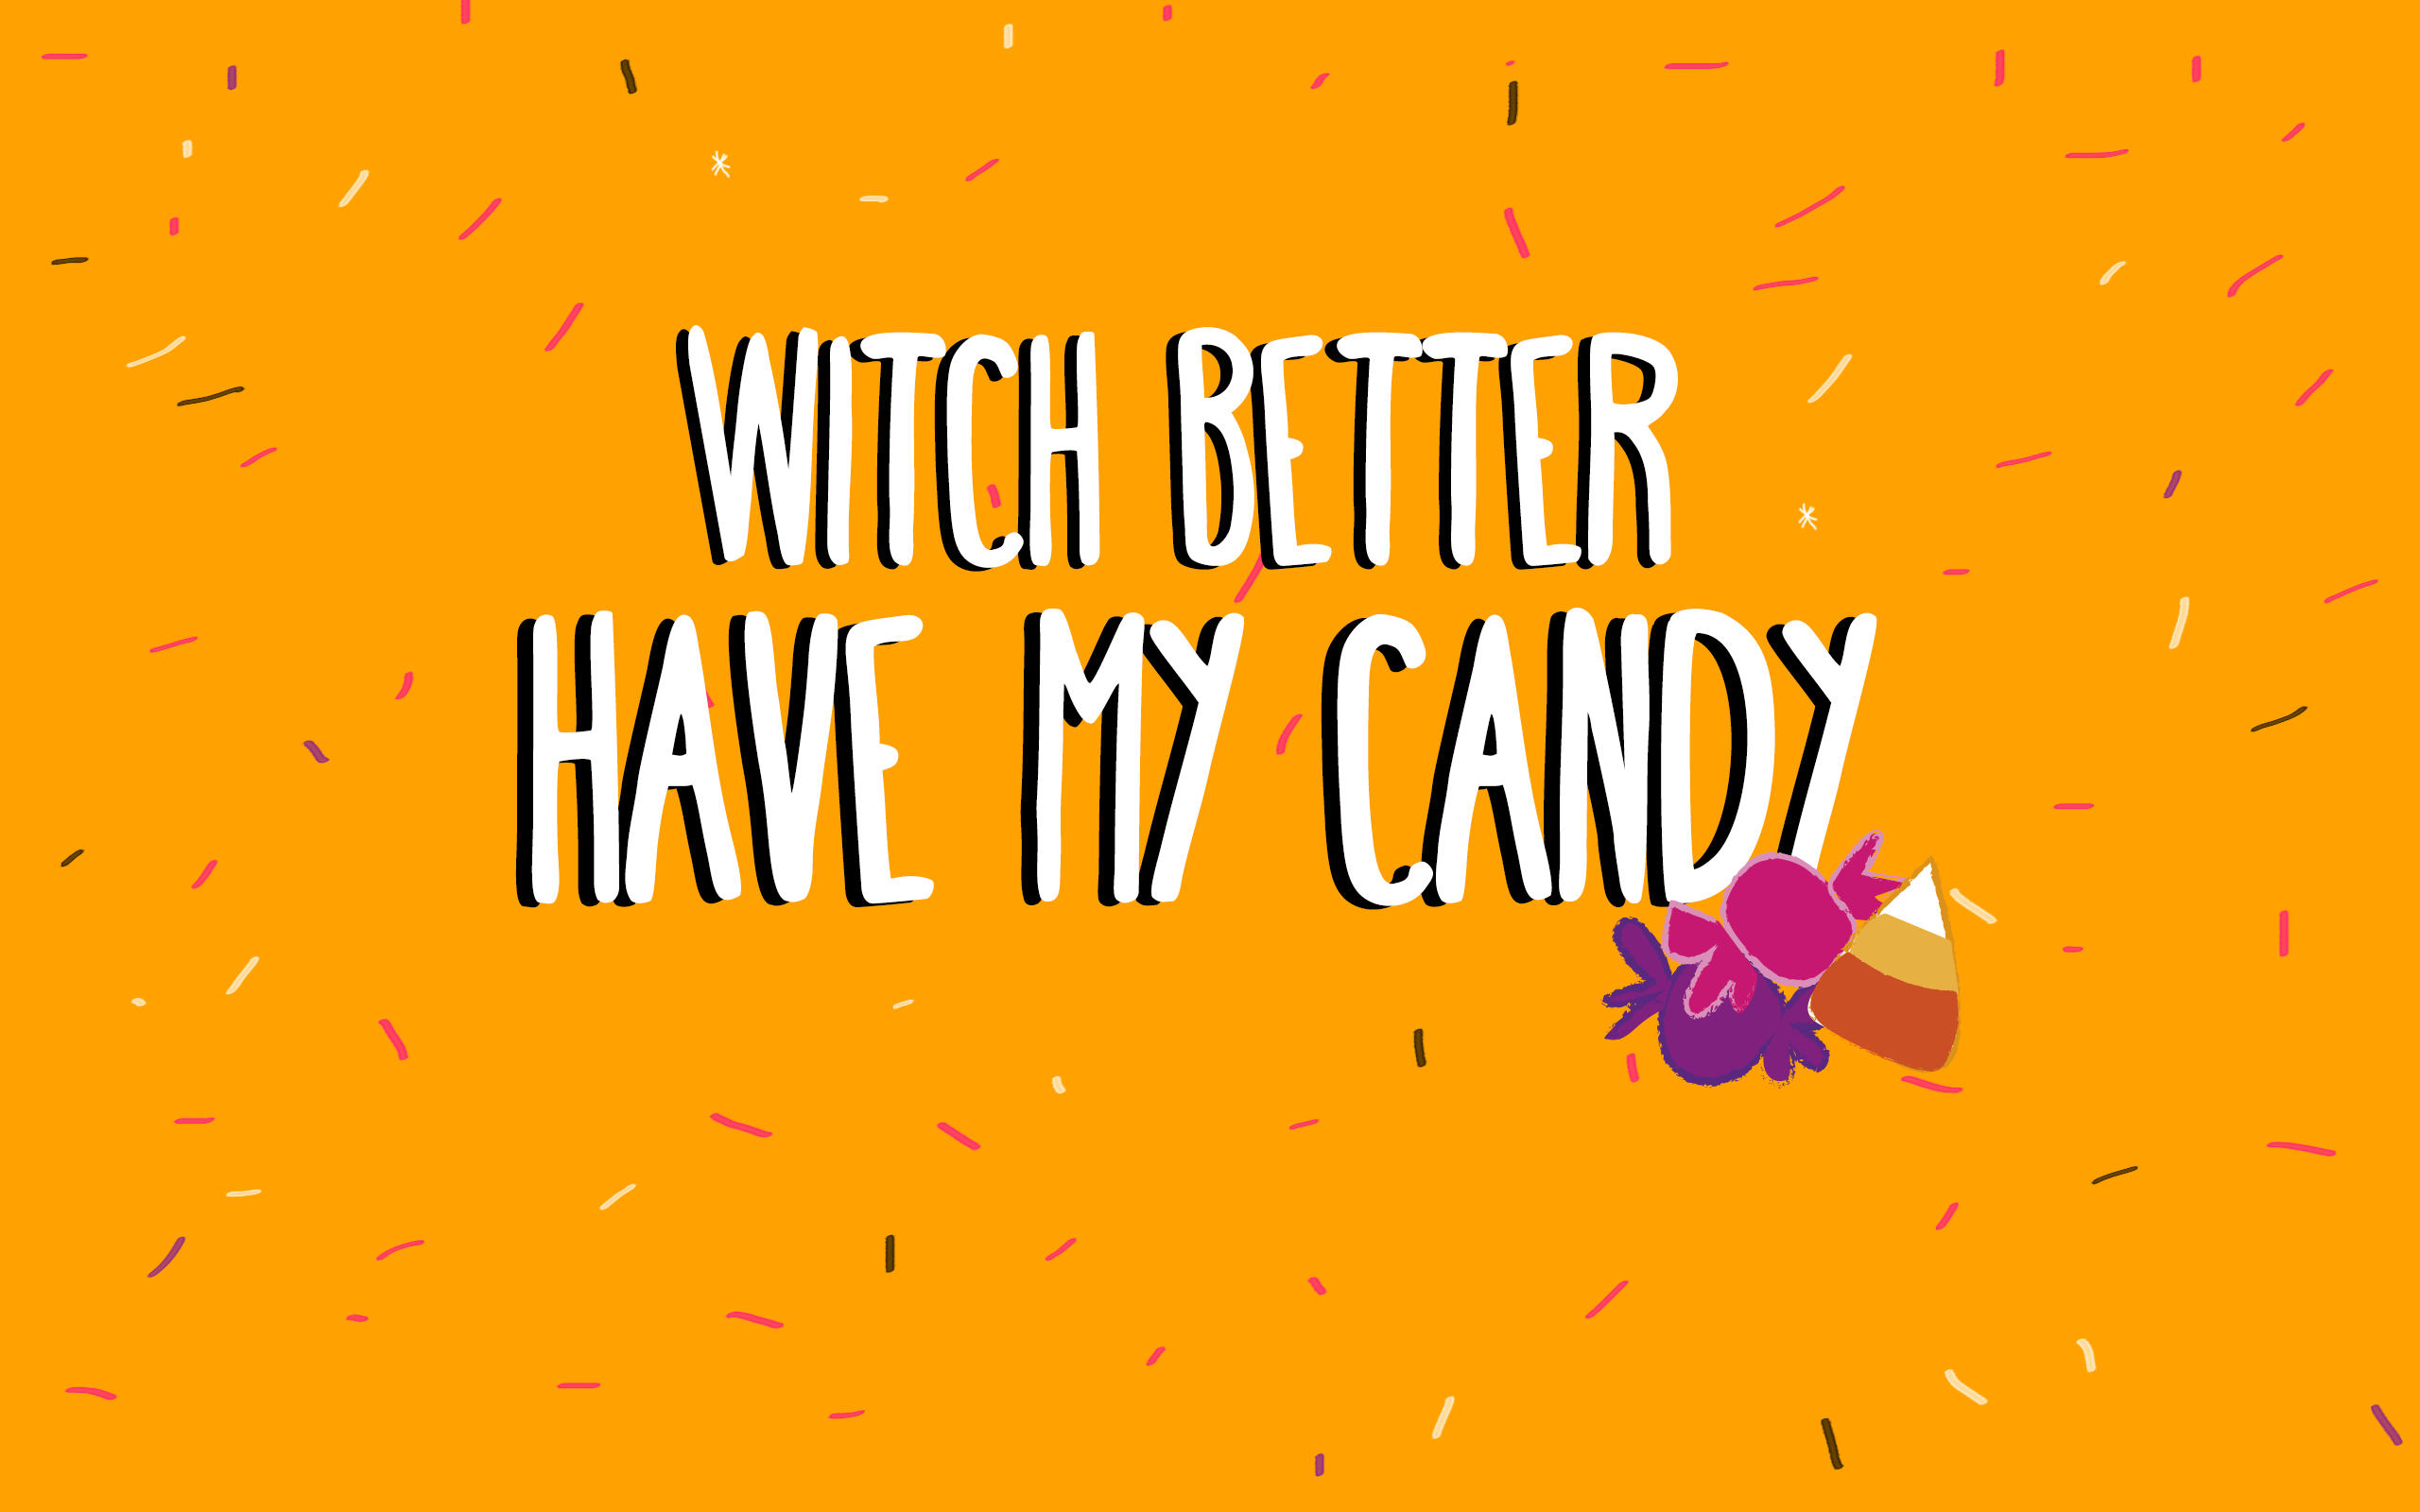 Free Halloween Wallpaper 2015 You'll Wish to Have